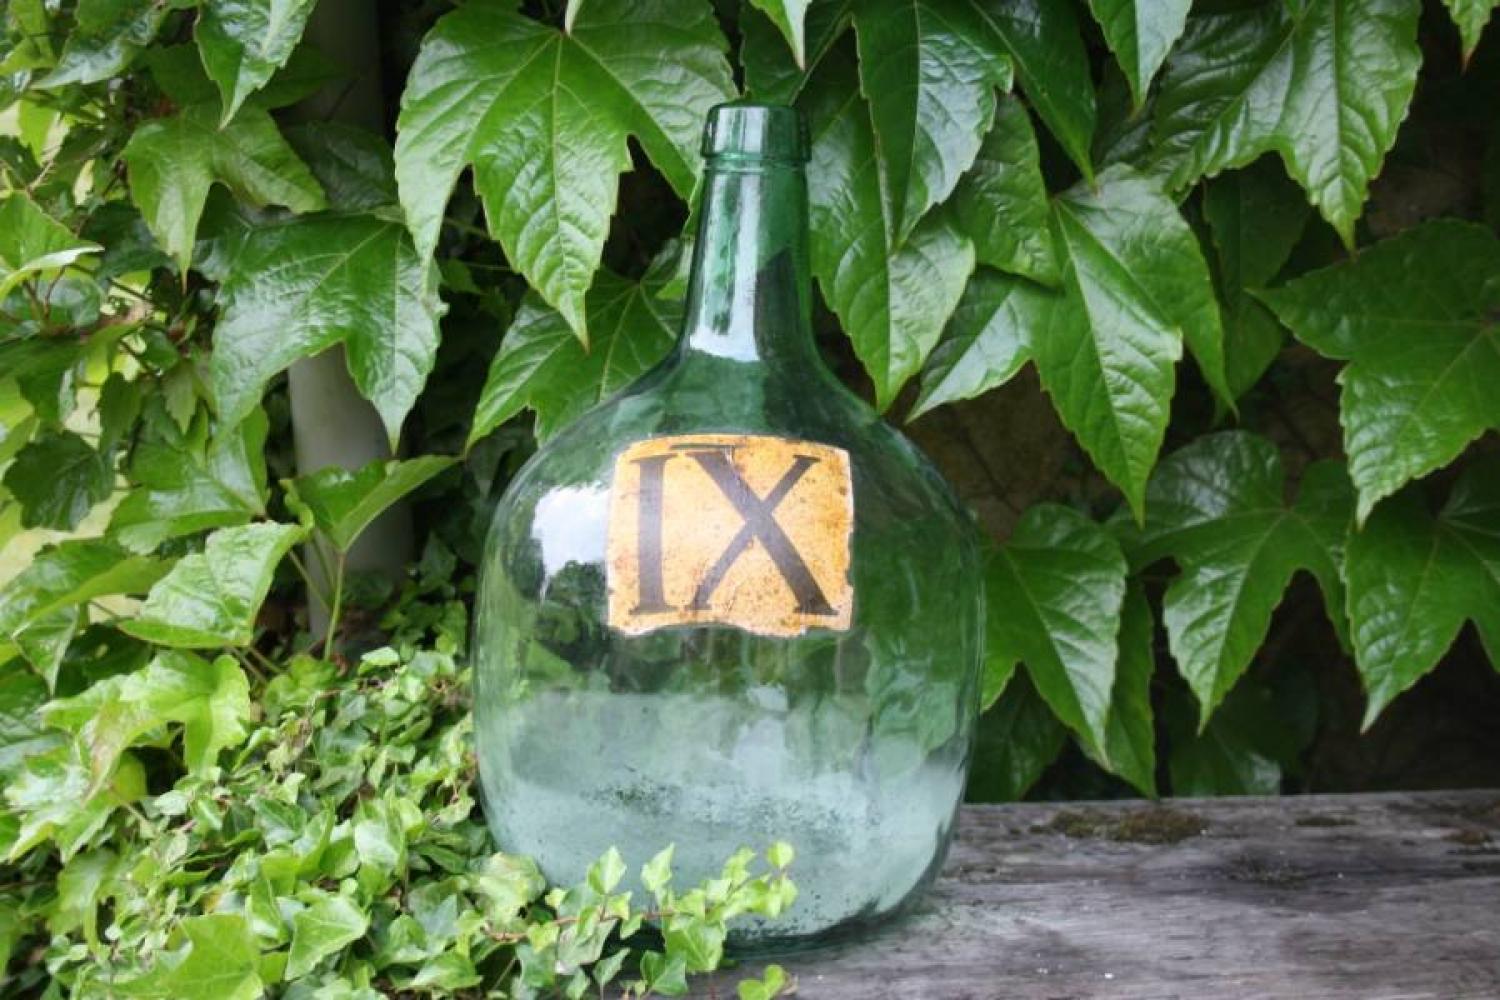 Spanish bottle with roman numerals